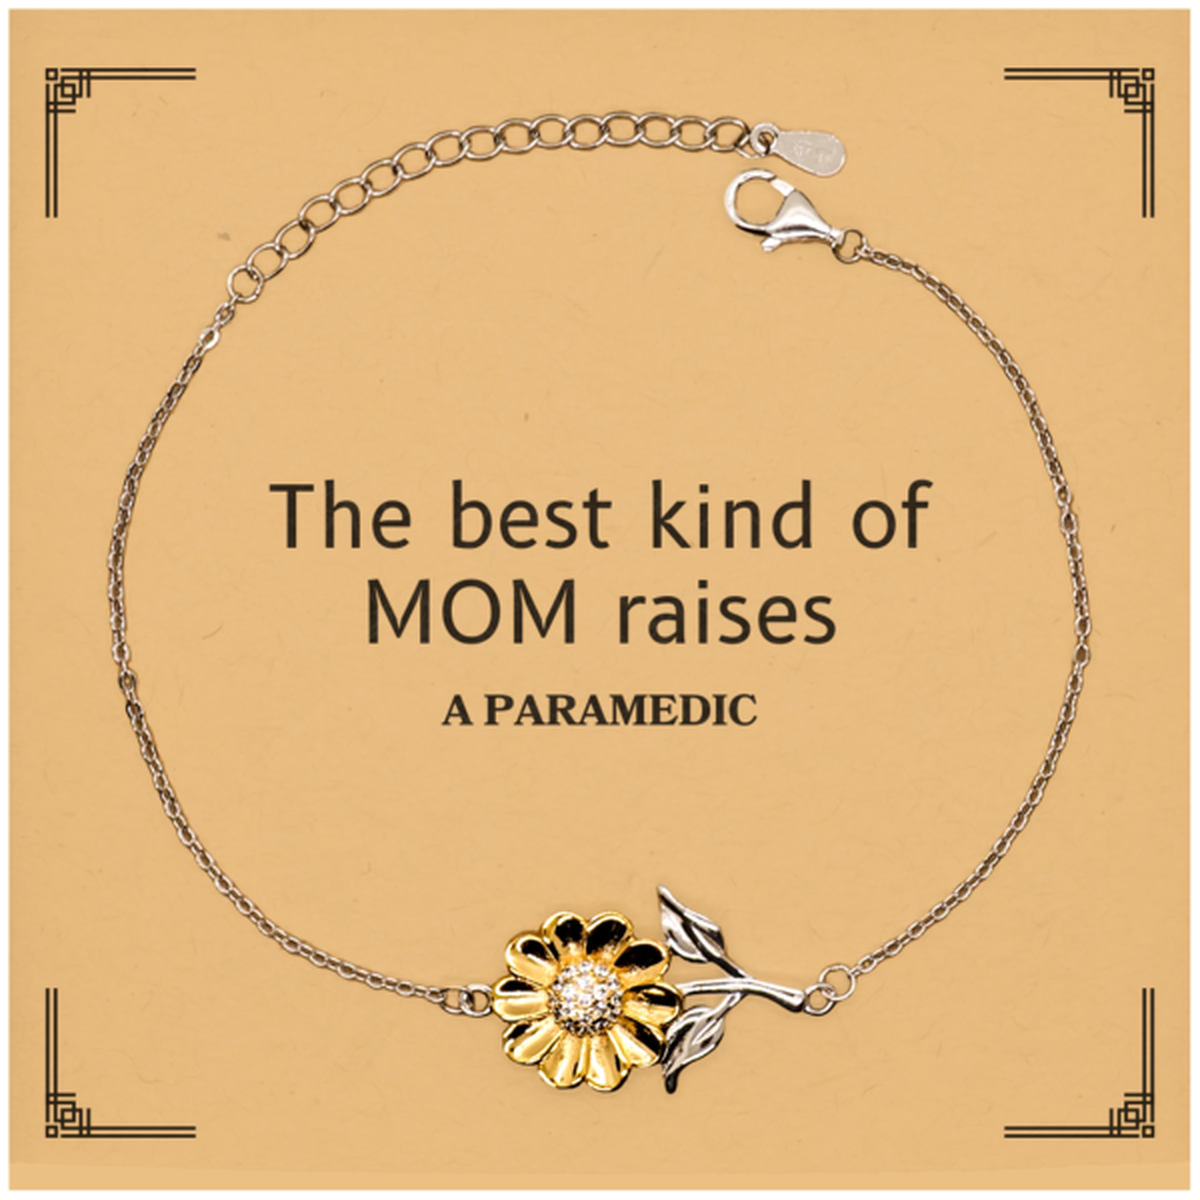 Funny Paramedic Mom Gifts, The best kind of MOM raises Paramedic, Birthday, Mother's Day, Cute Sunflower Bracelet for Paramedic Mom